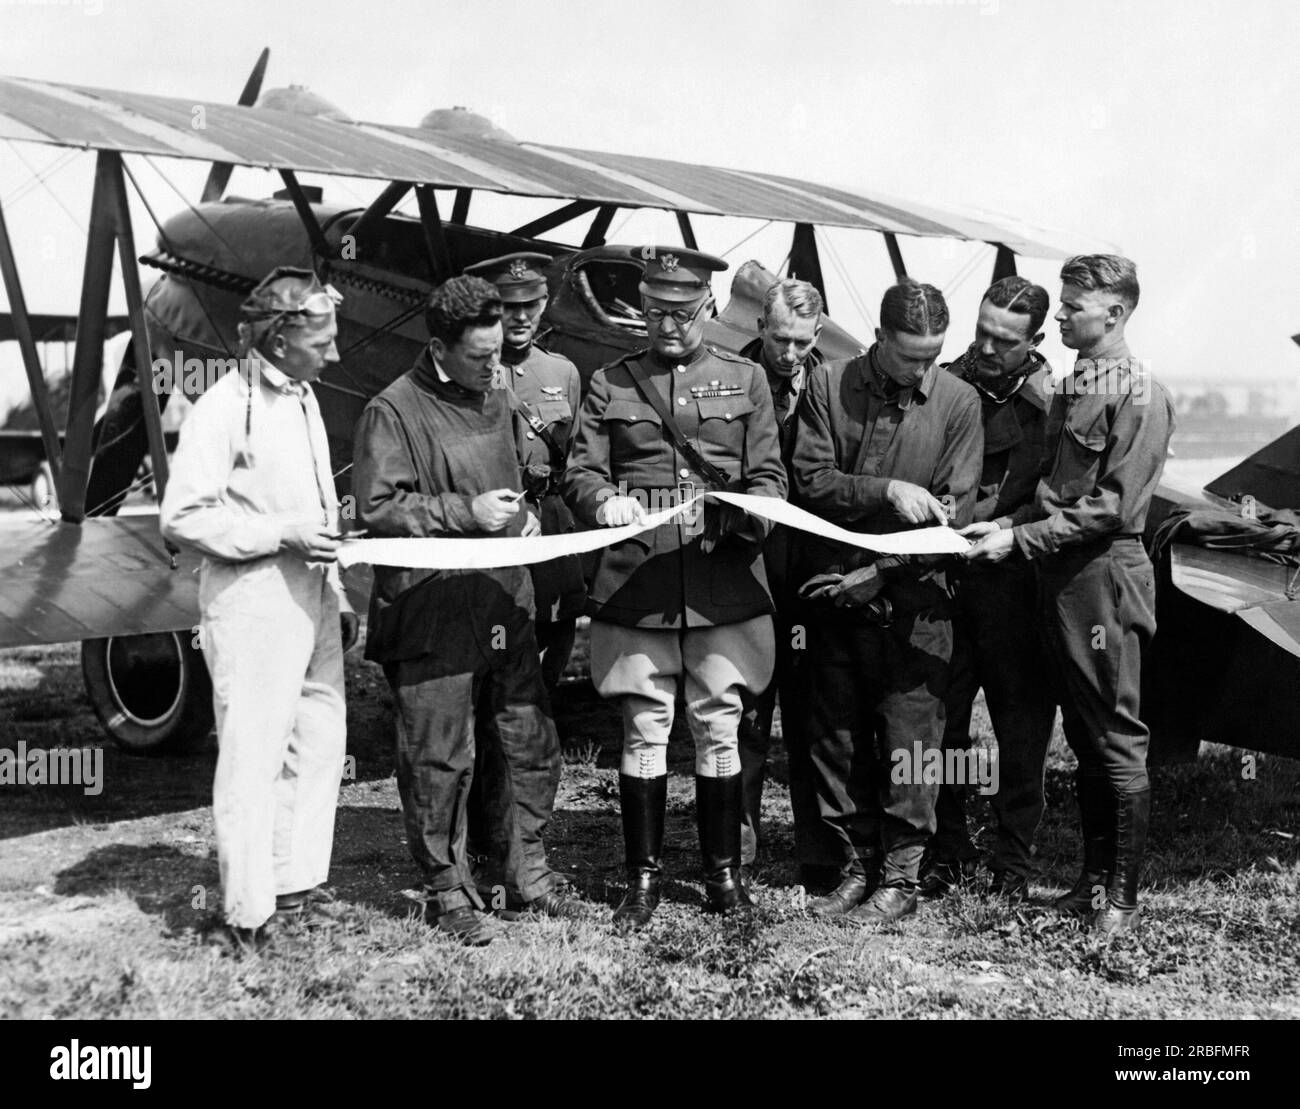 Maywood, Illinois:  July 20, 1925 Army pilots check their maps during their transcontinental flight between Selfridge Airfiled in  Harrison, Michigan and San Francisco, California. Behind them is one of the 5 Curtis P-! Hawks open cockpit biplane fighter aircrafts that they are flying. Stock Photo